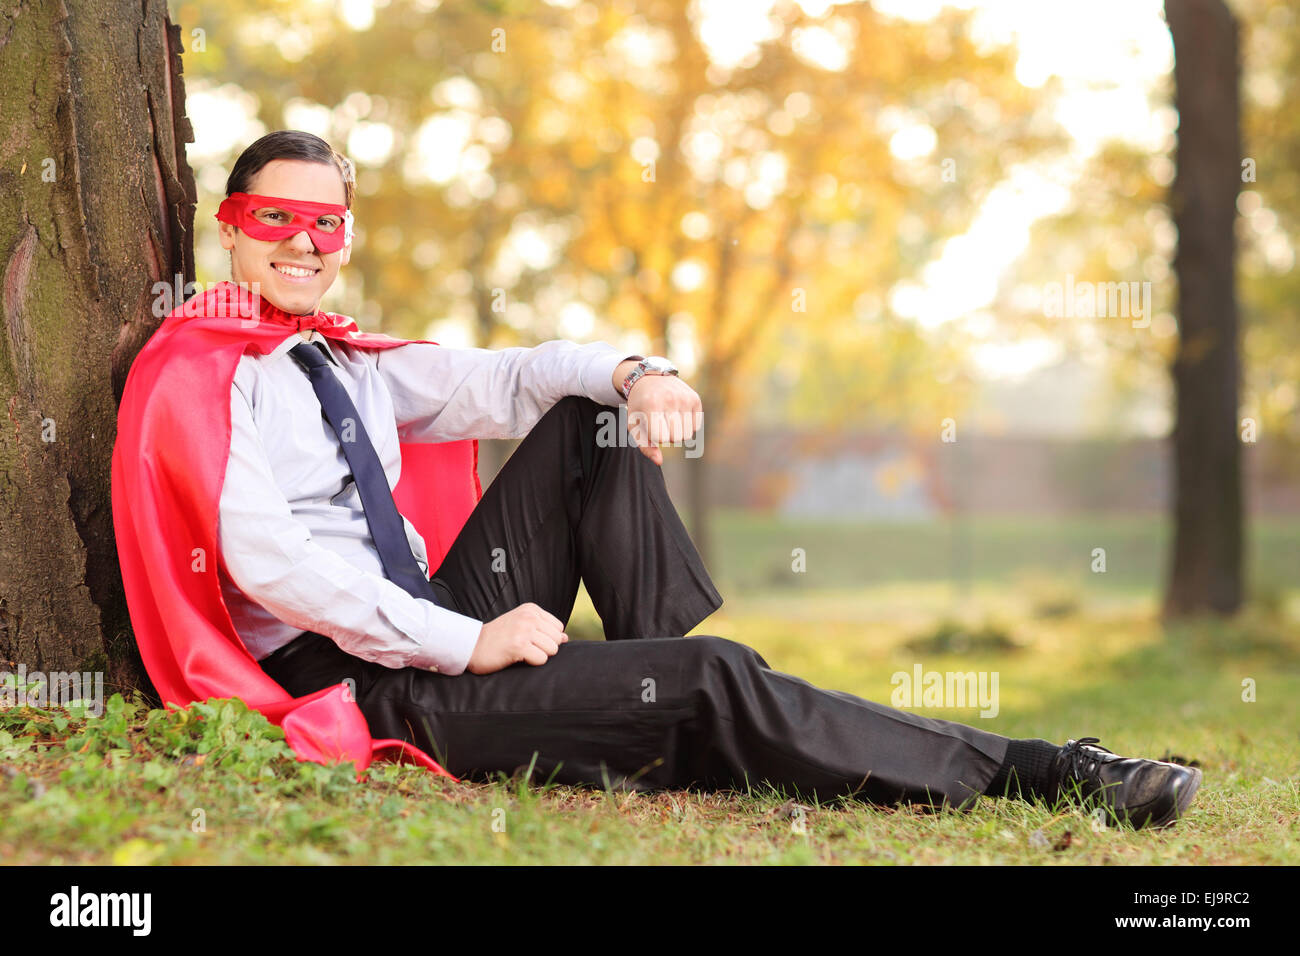 Joyful man in superhero outfit sitting on a grass, leaned on a tree. The shot is in a park during early autumn Stock Photo